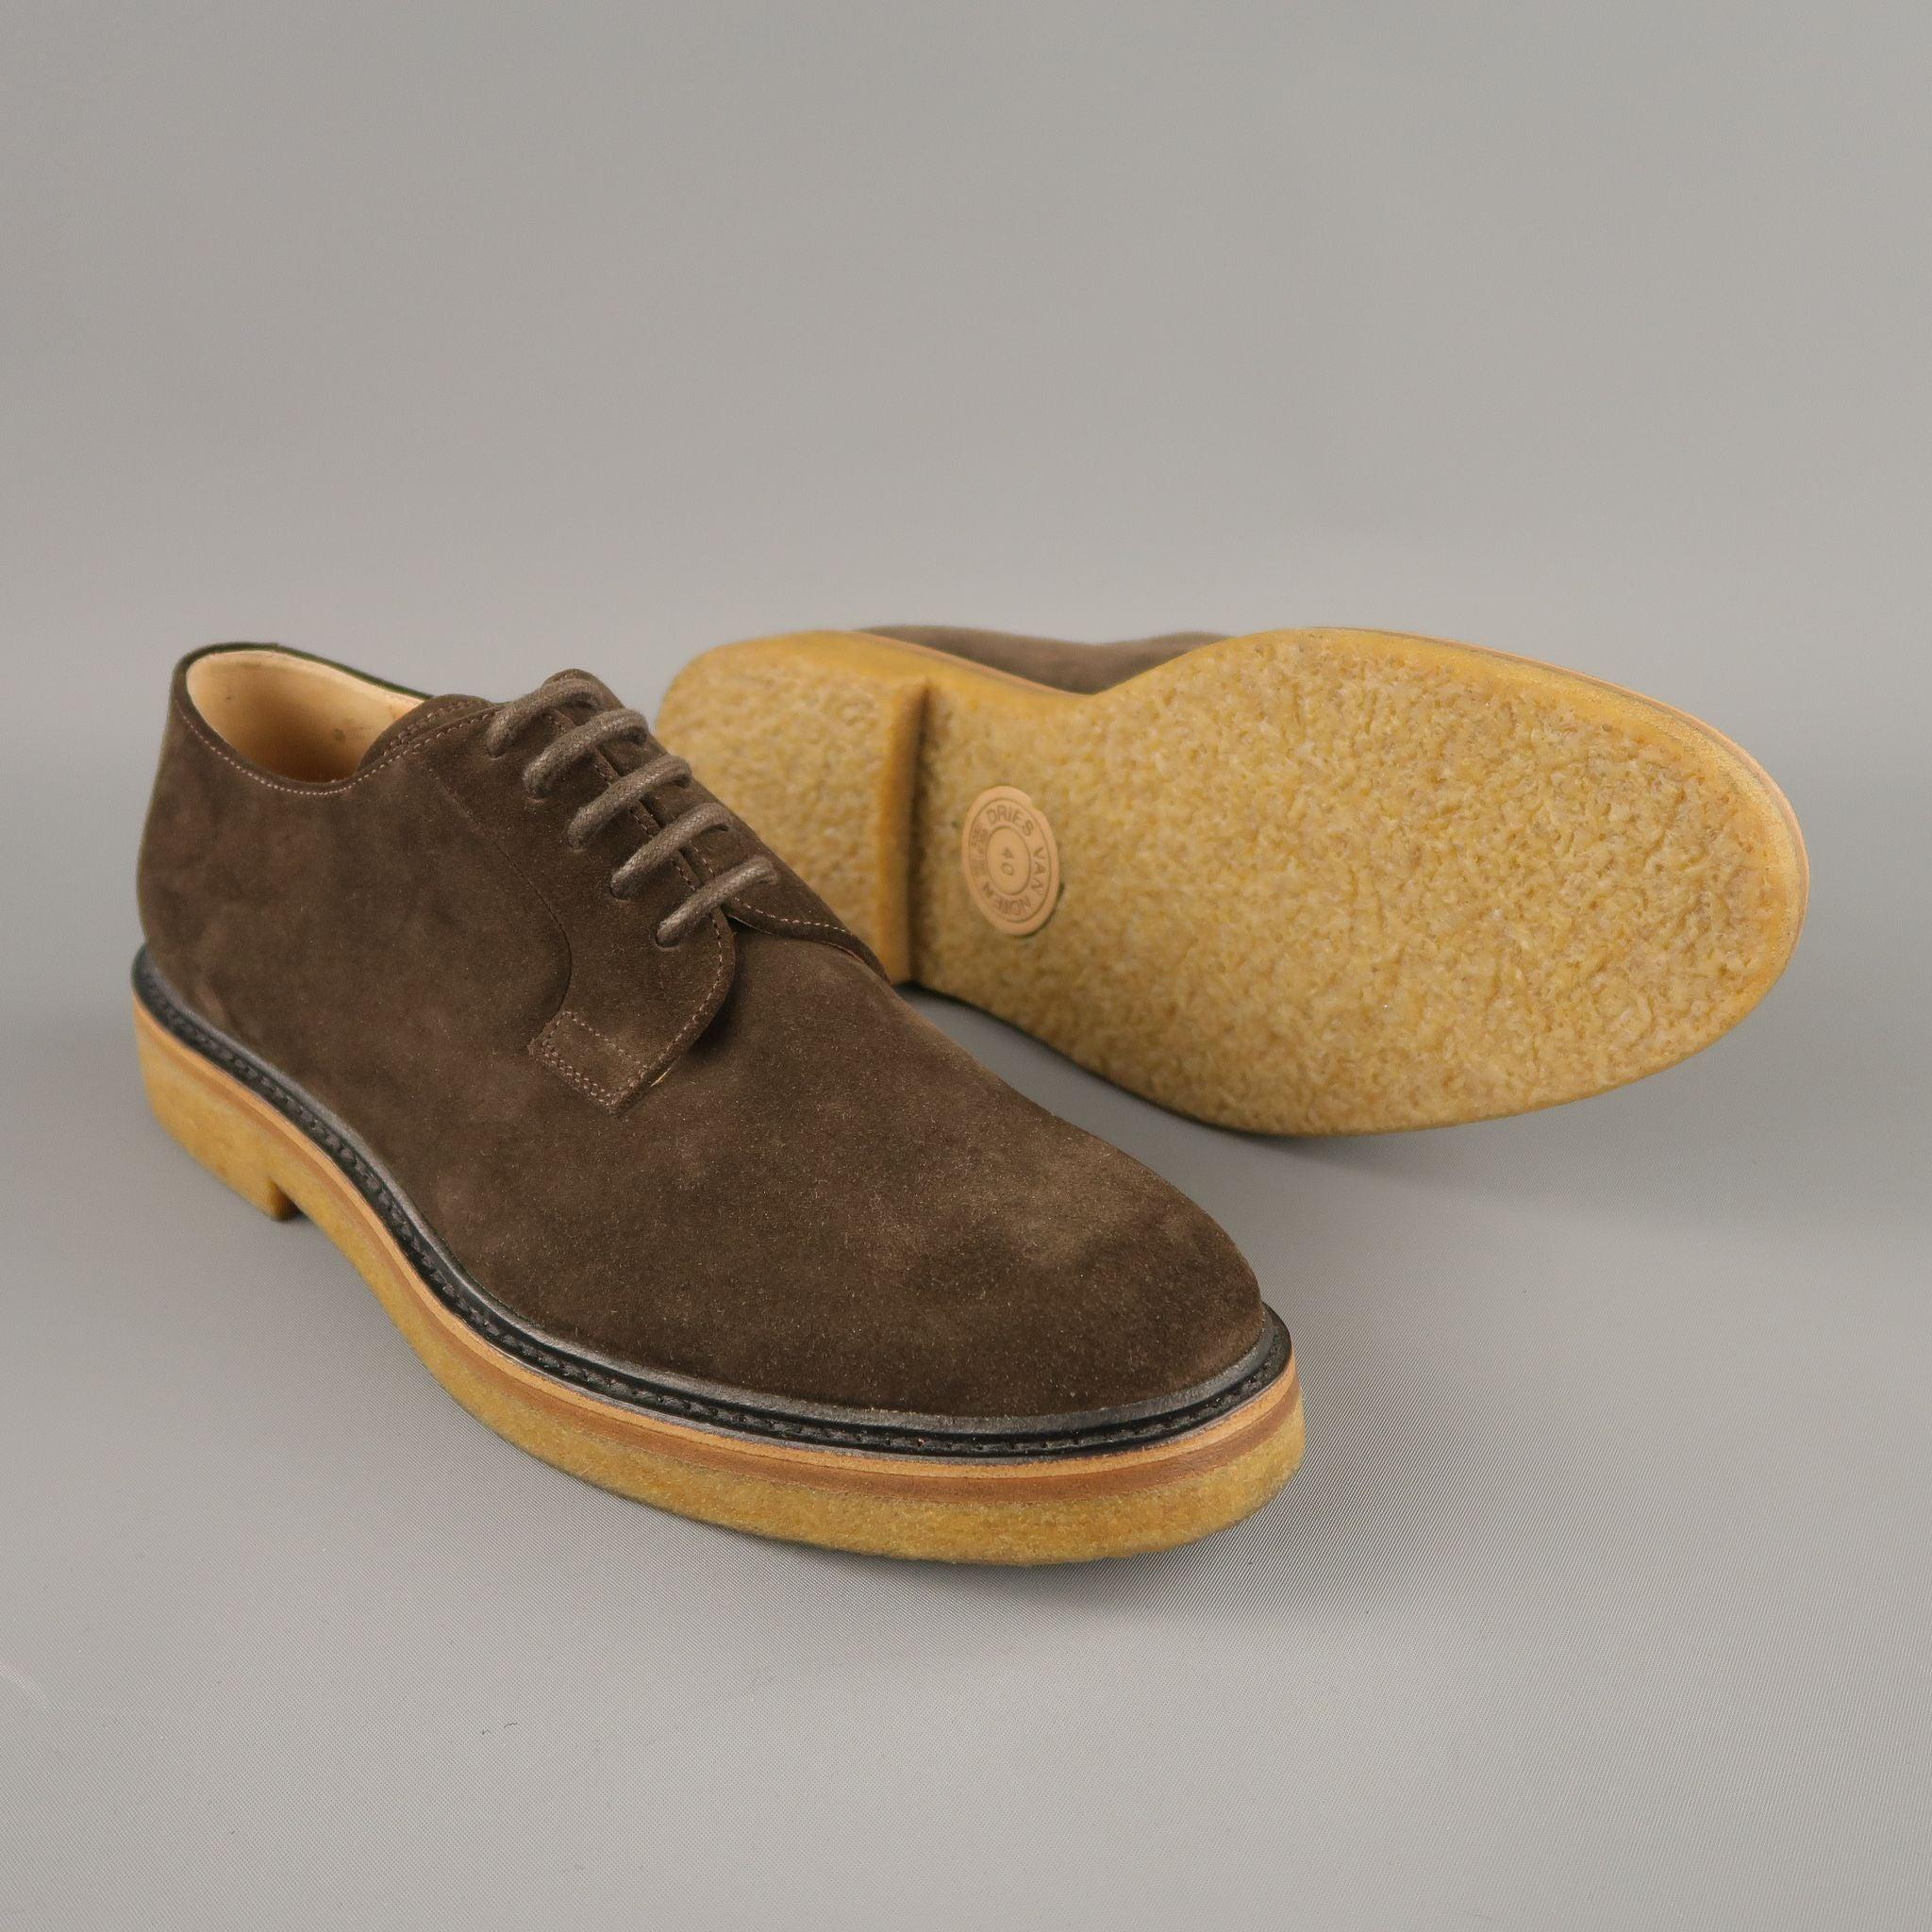 DRIES VAN NOTEN Size US 7 Brown Solid Suede Crepe Sole Lace Up Shoes In Excellent Condition For Sale In San Francisco, CA